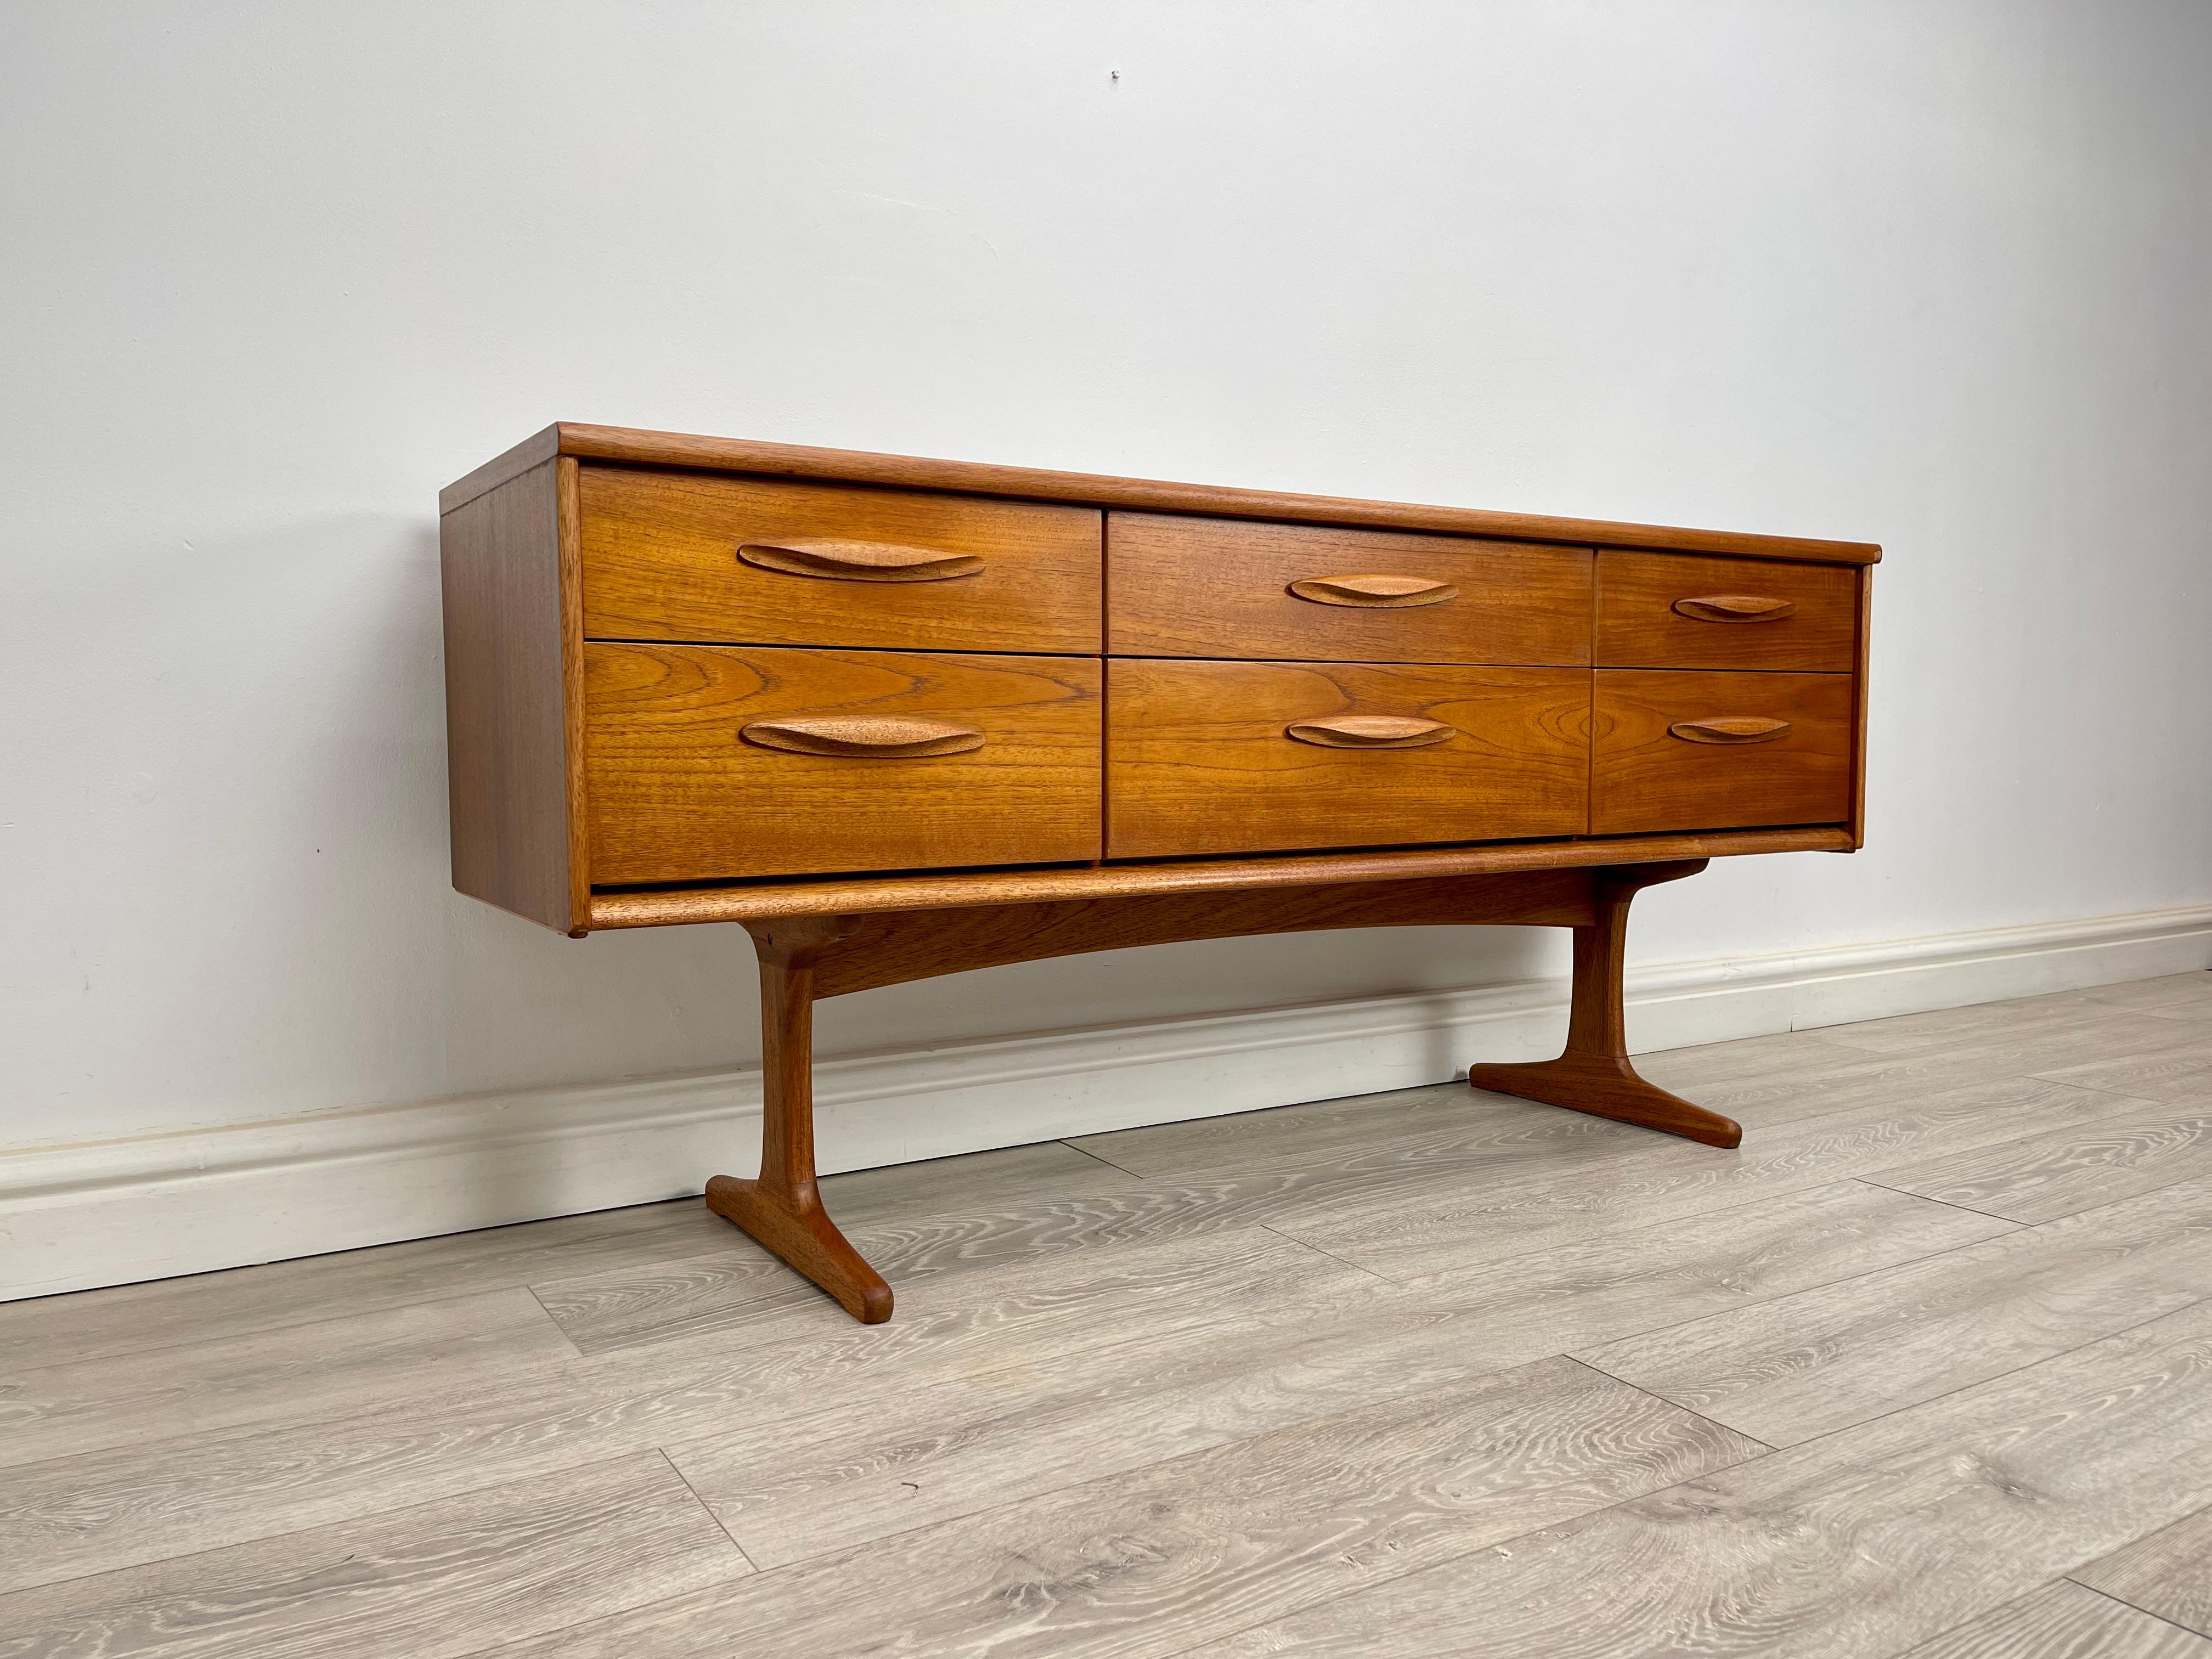 CHEST OF DRAWERS 
Midcentury teak chest of drawers / sideboard made by Austinsuite circa 1960 .

The chest of drawers has stunning grain and golden patina throughout.

There’s six drawers with solid teak handles , all drawers run